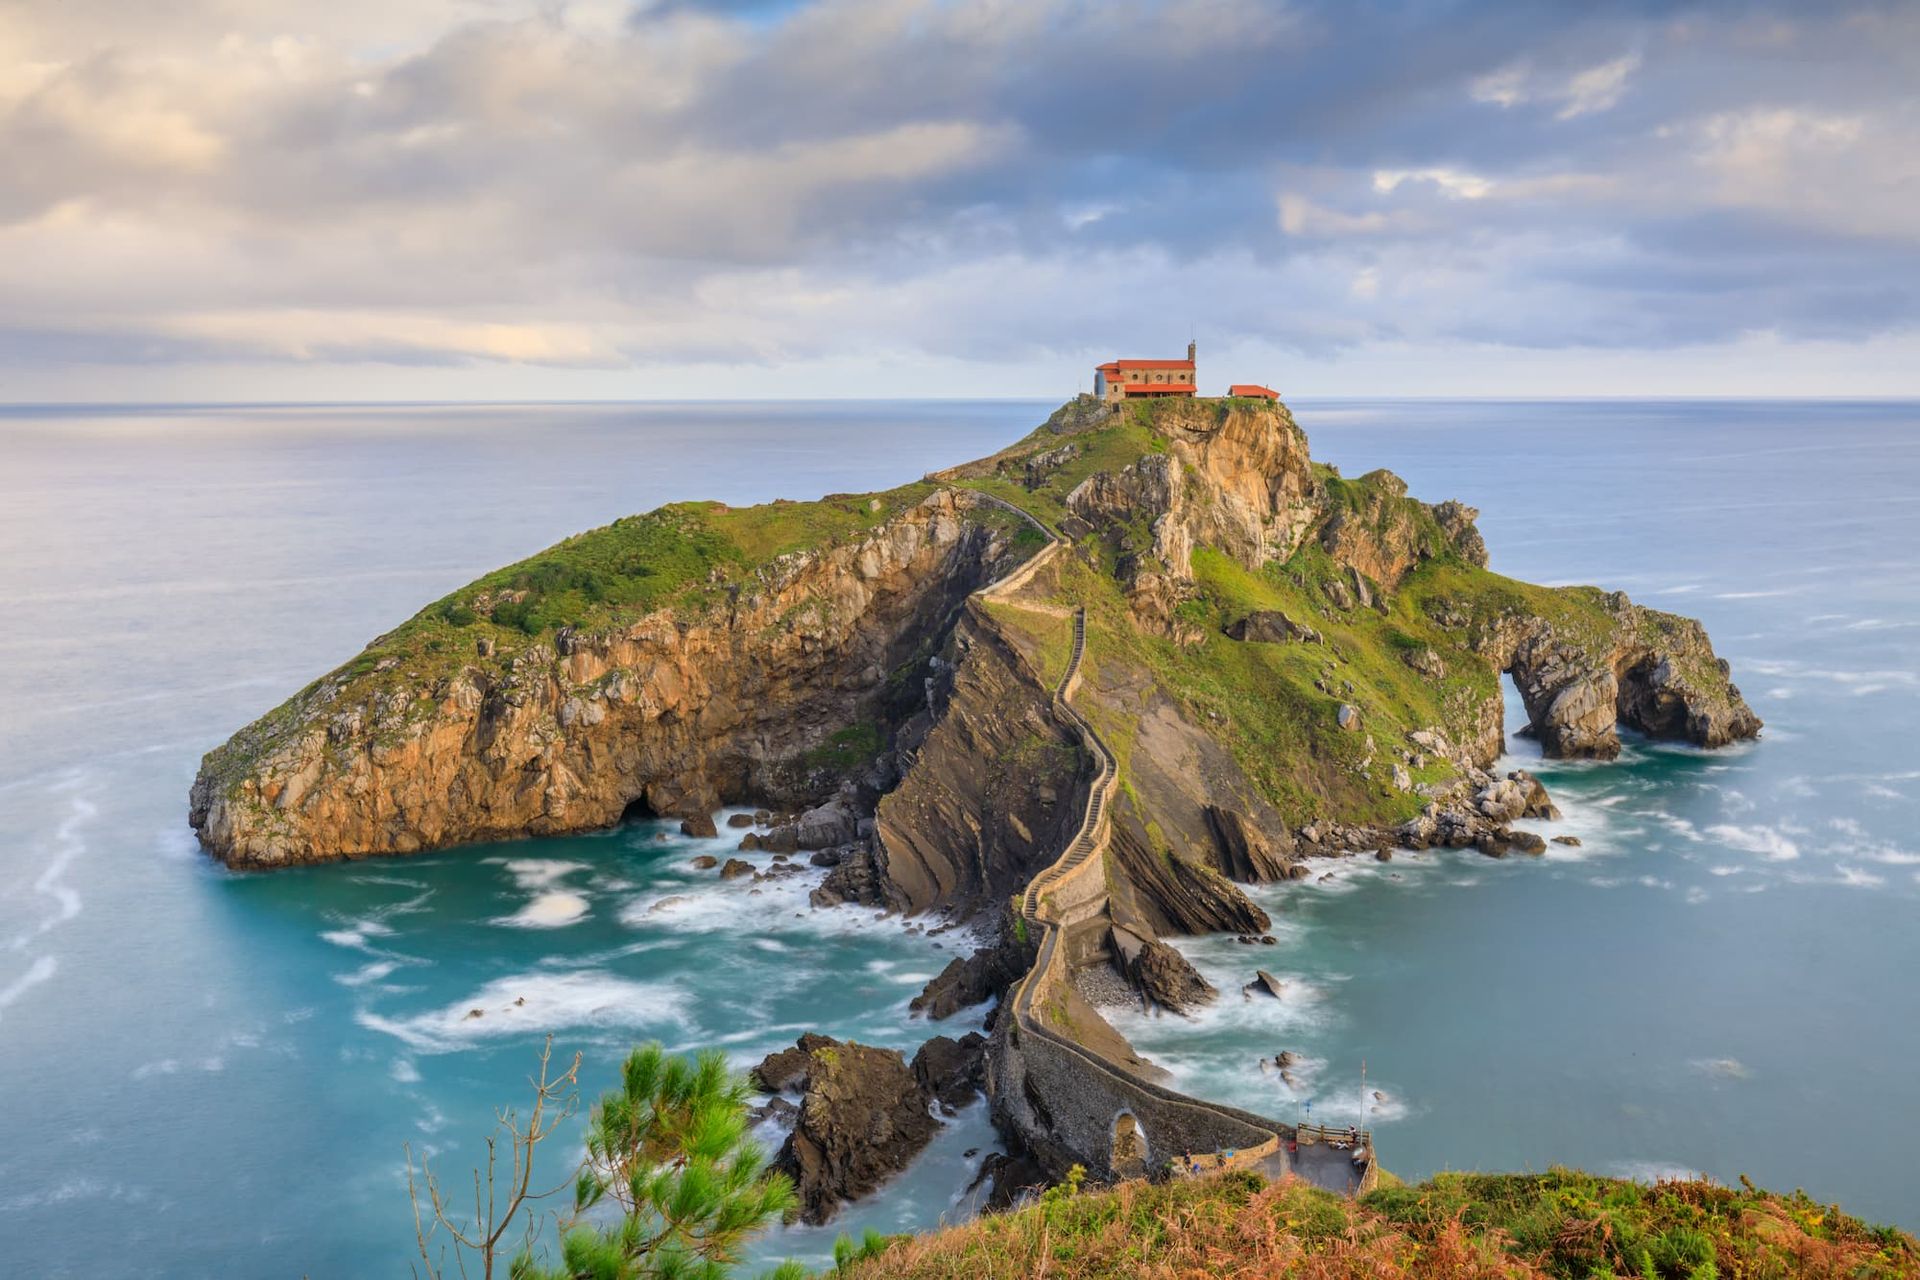 Visit San Juan de Gaztelugatxe and immerse yourself in the world of Game of Thrones.